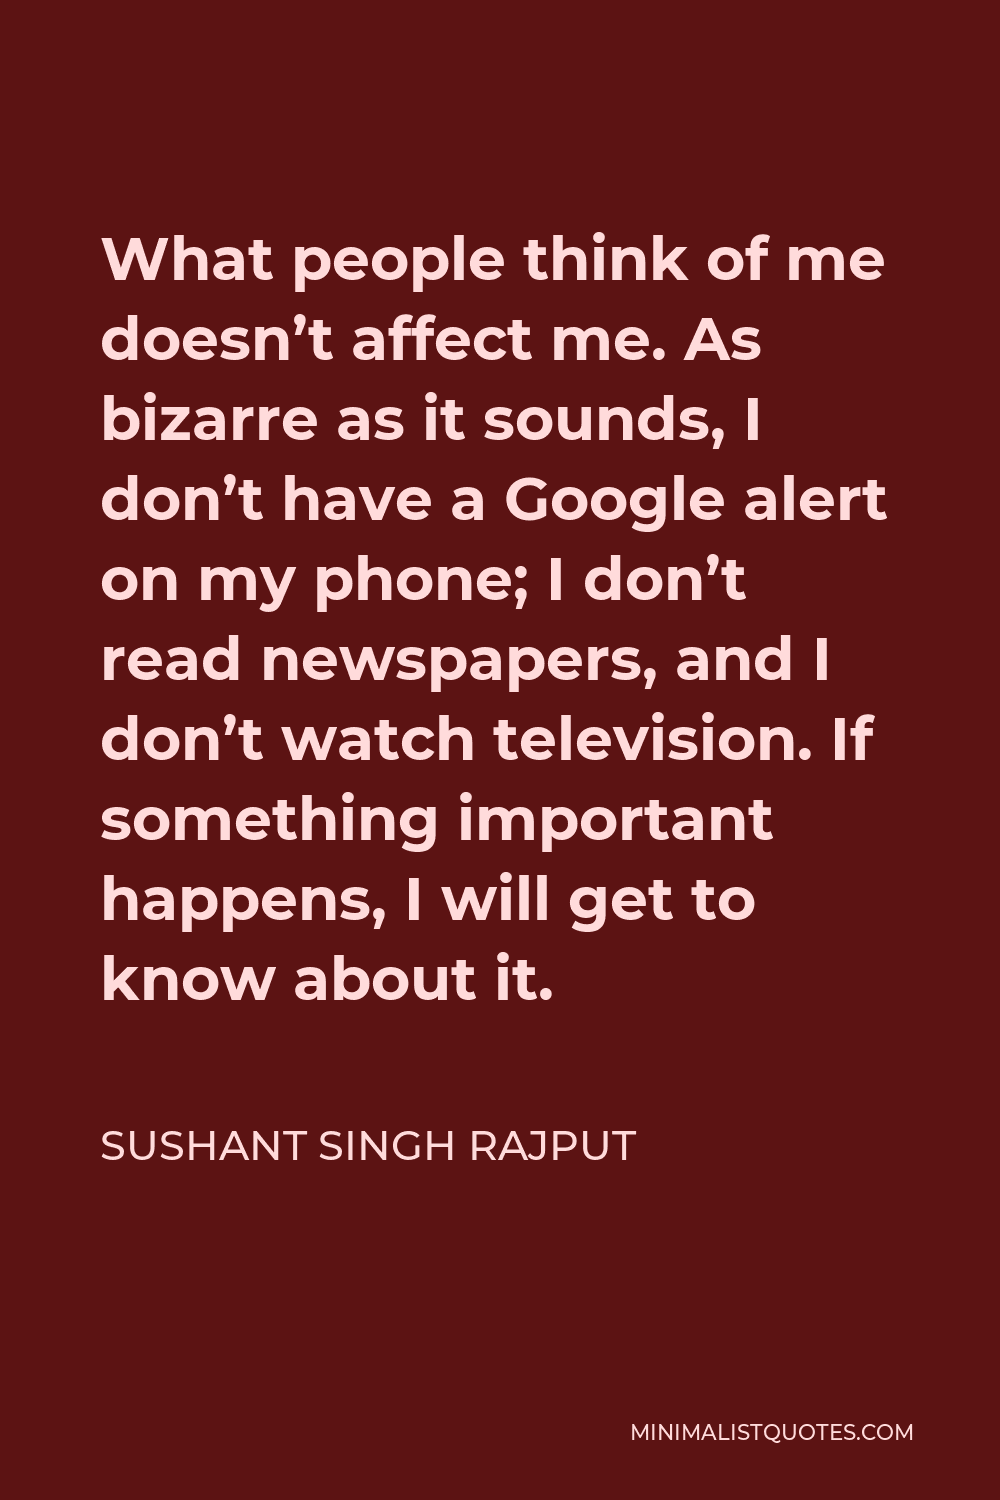 Sushant Singh Rajput Quote - What people think of me doesn’t affect me. As bizarre as it sounds, I don’t have a Google alert on my phone; I don’t read newspapers, and I don’t watch television. If something important happens, I will get to know about it.